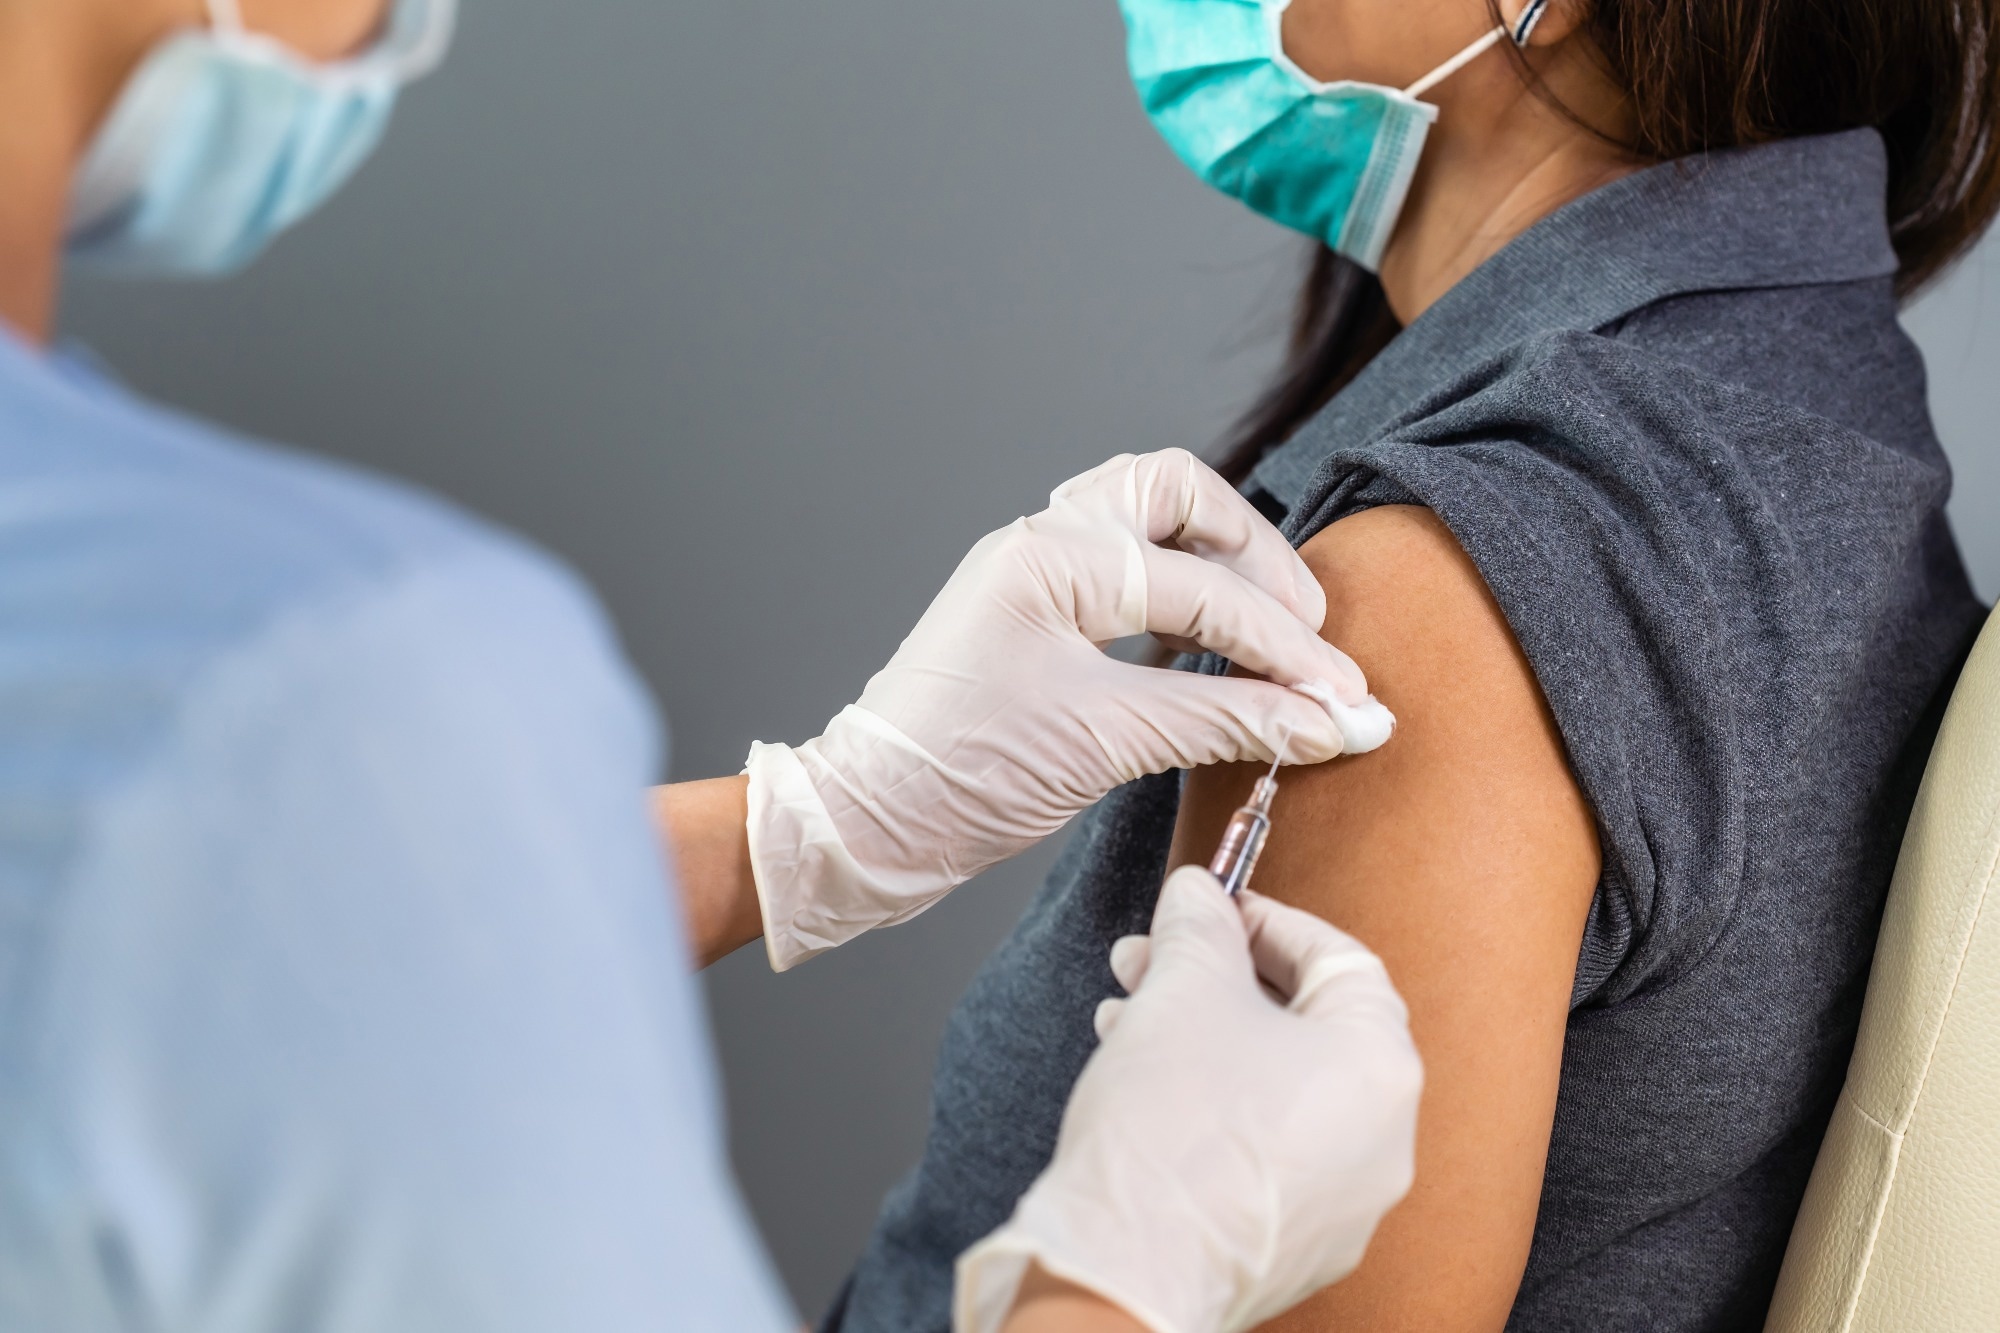 Study: Safety, immunogenicity and efficacy of an mRNA-based COVID-19 vaccine, GLB-COV2-043, in preclinical animal models. Image Credit: BaLL LunLa/Shutterstock.com